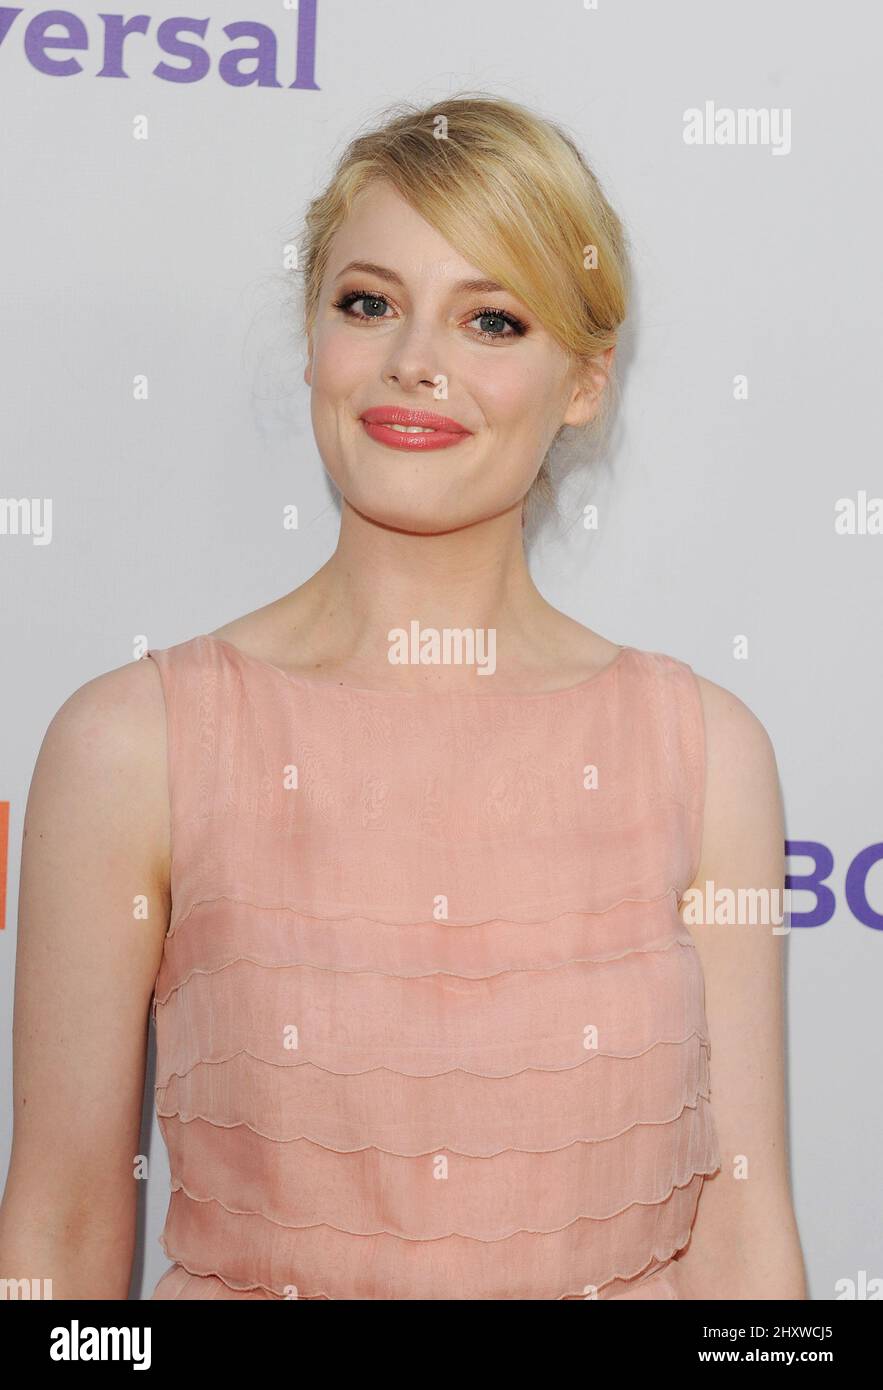 Gillian Jacobs during the NBC Universal Press Tour All Star Party held at the The Bazaar at the SLS Hotel, California Stock Photo